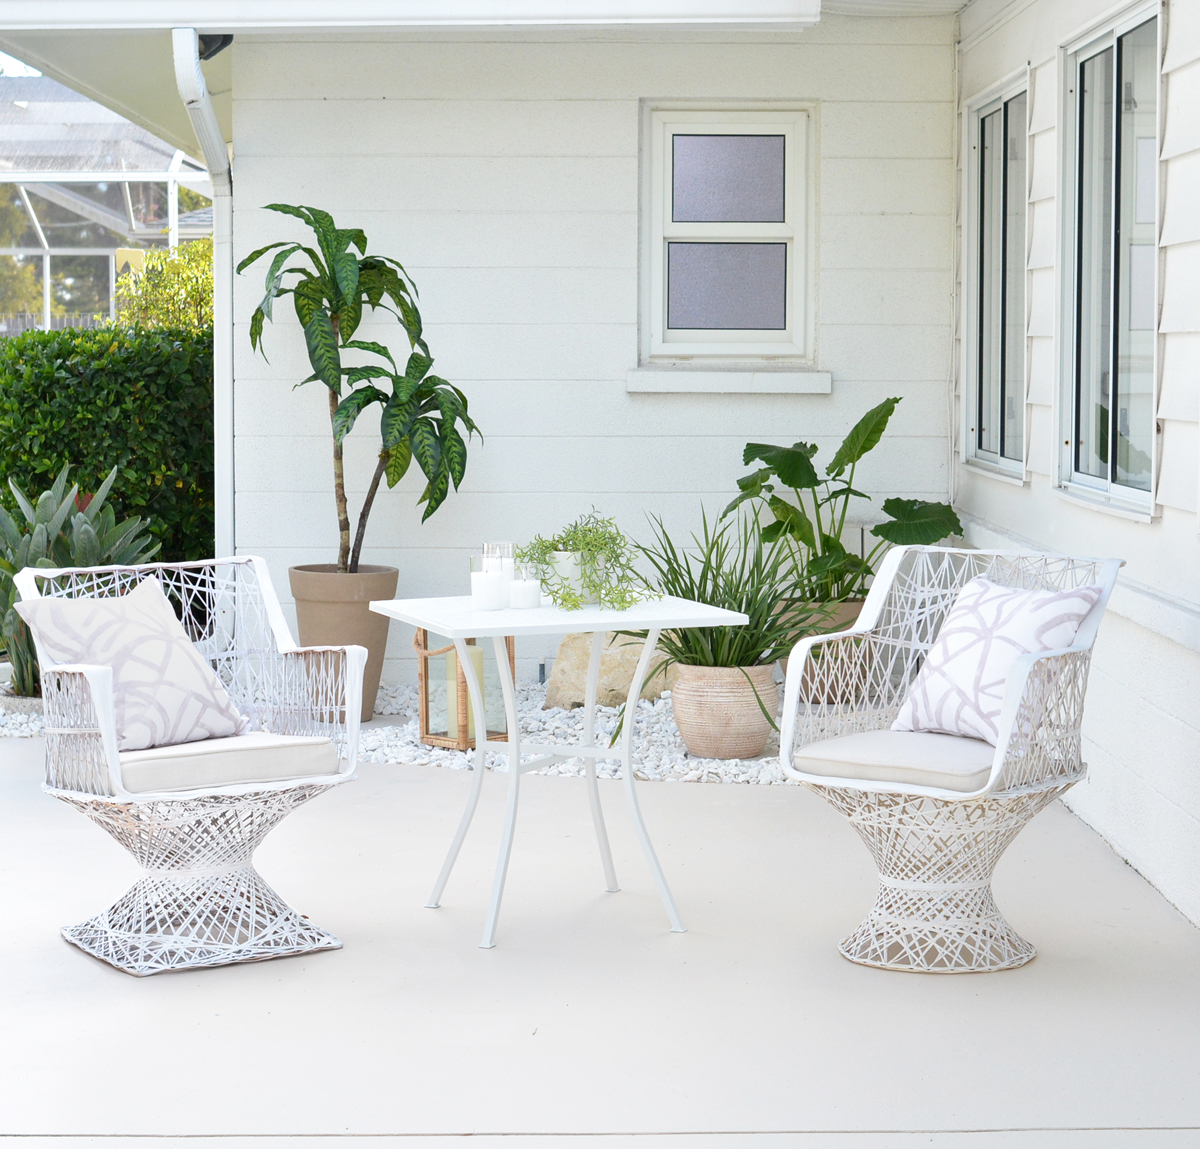 Florida House: Patio Makeover | Centsational Style